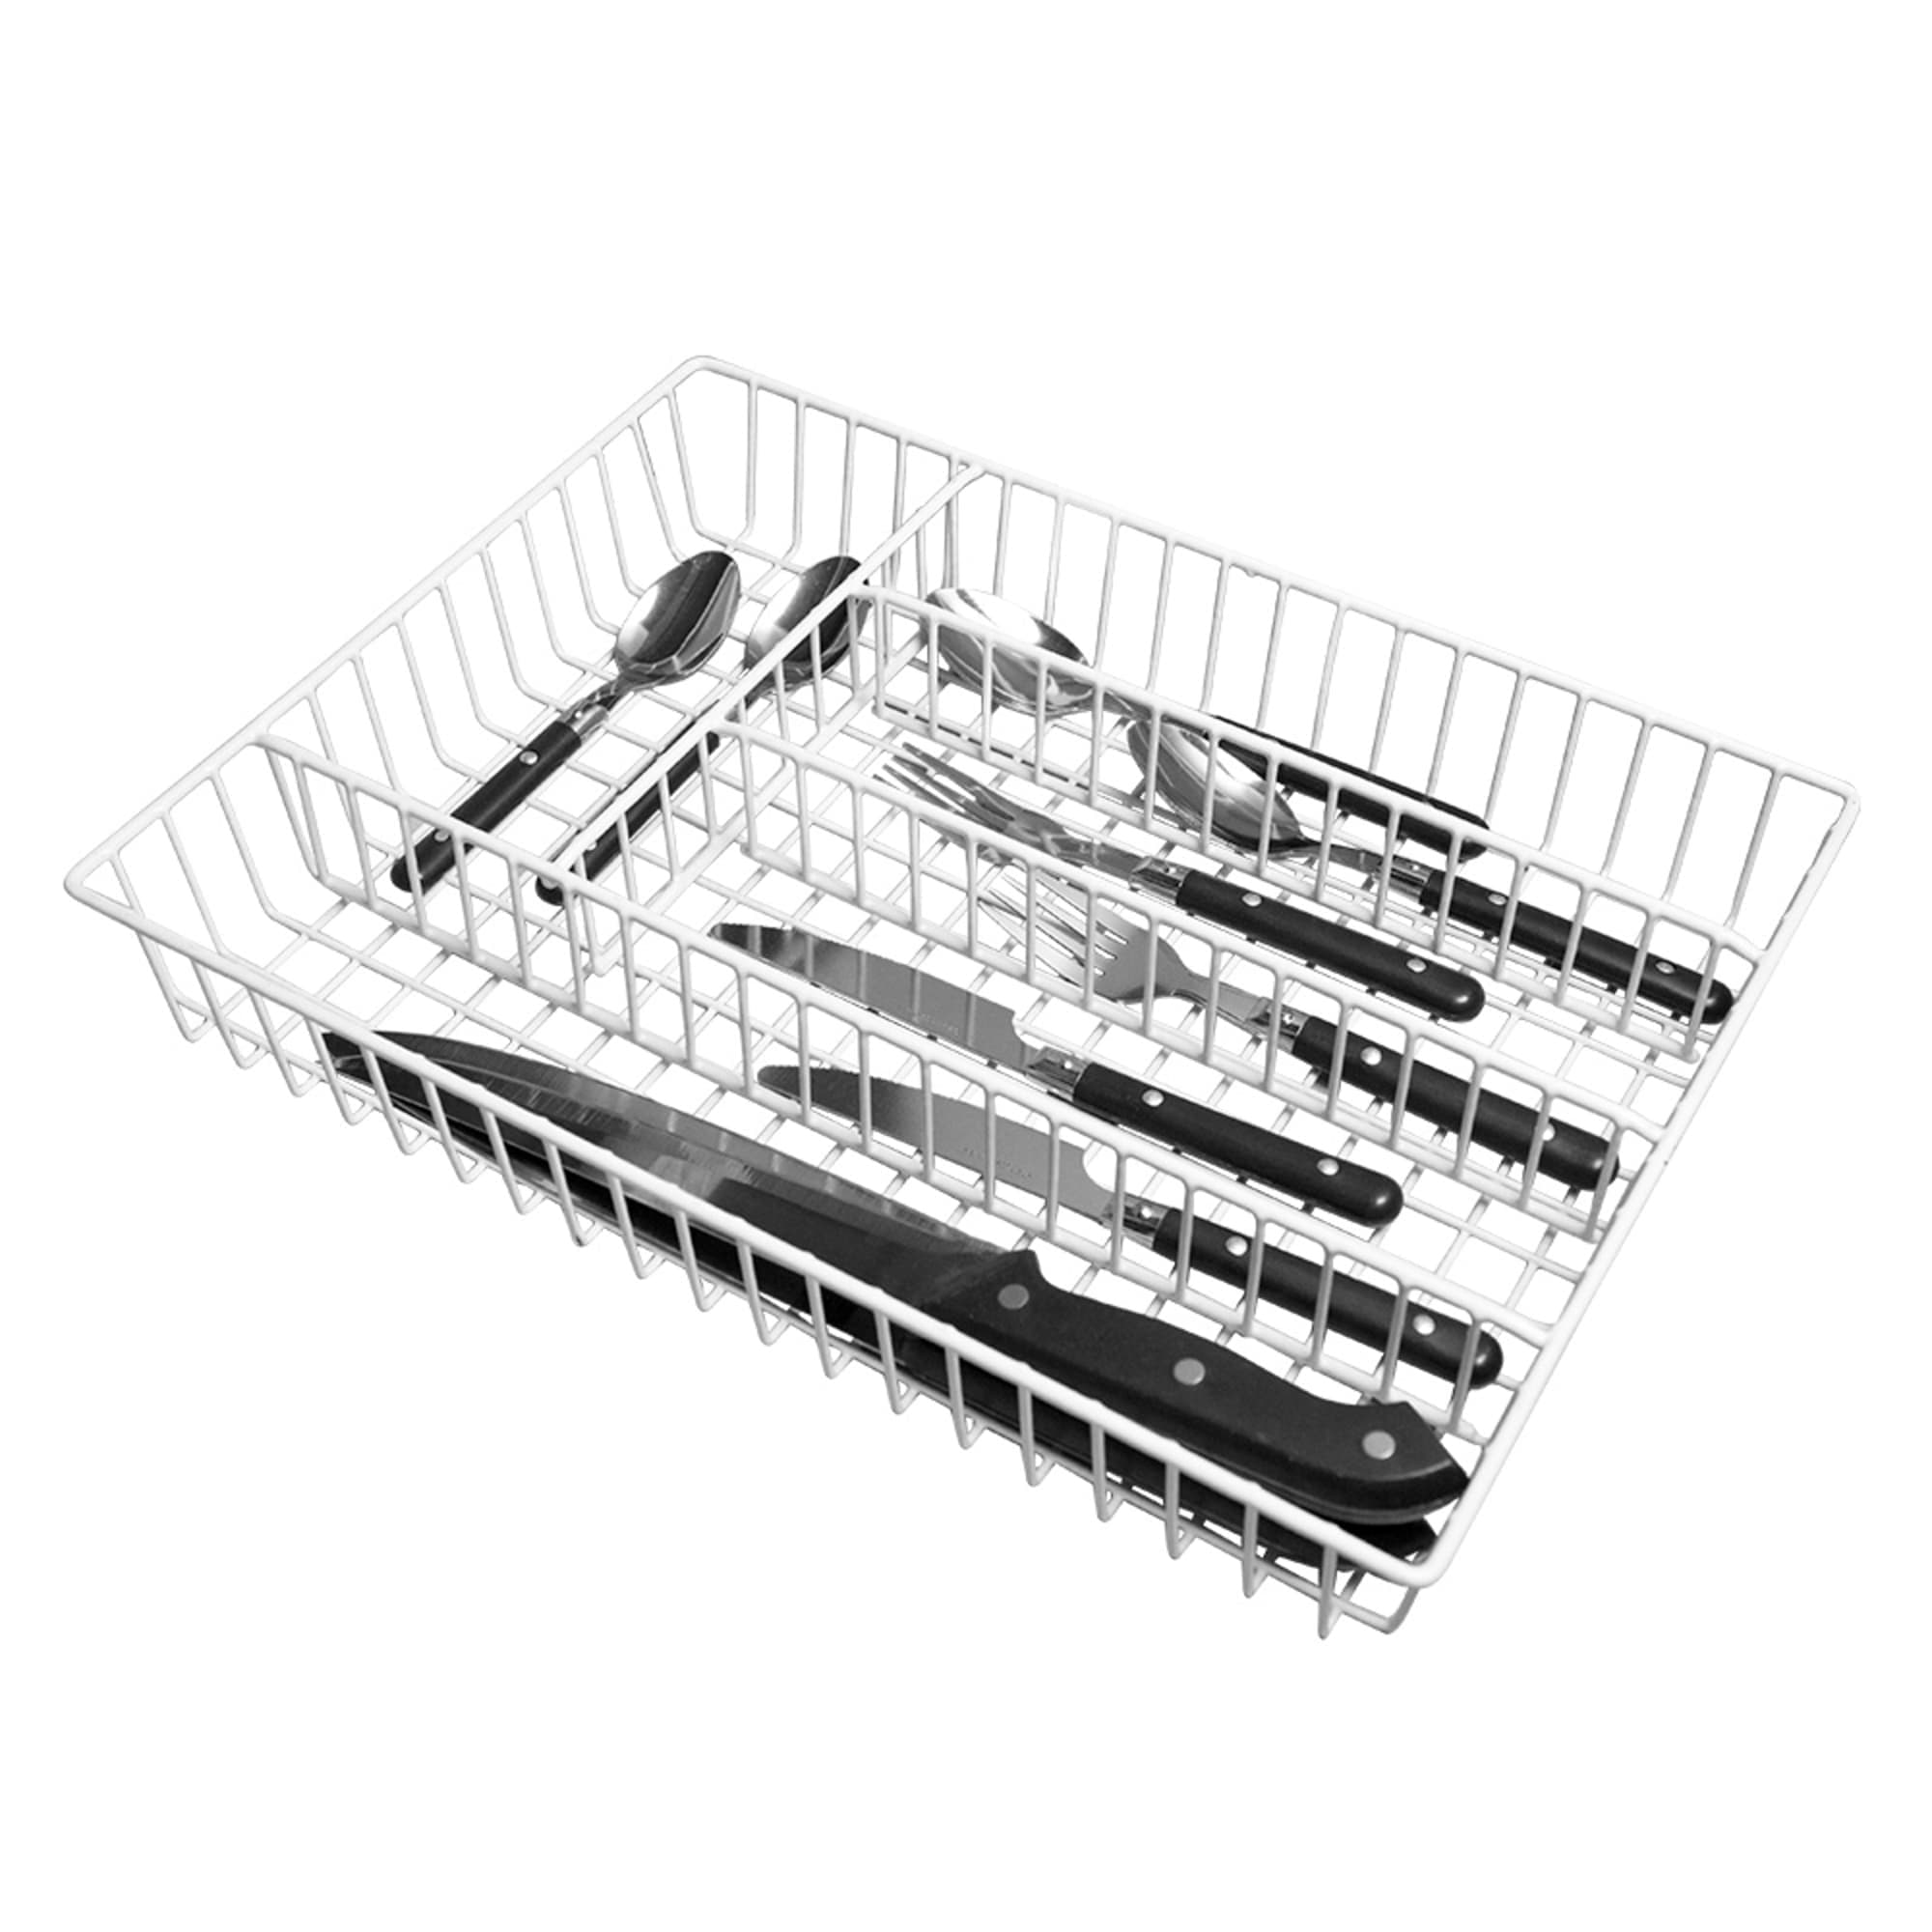 Home Basics Vinyl Coated Steel Cutlery Tray $8.00 EACH, CASE PACK OF 12